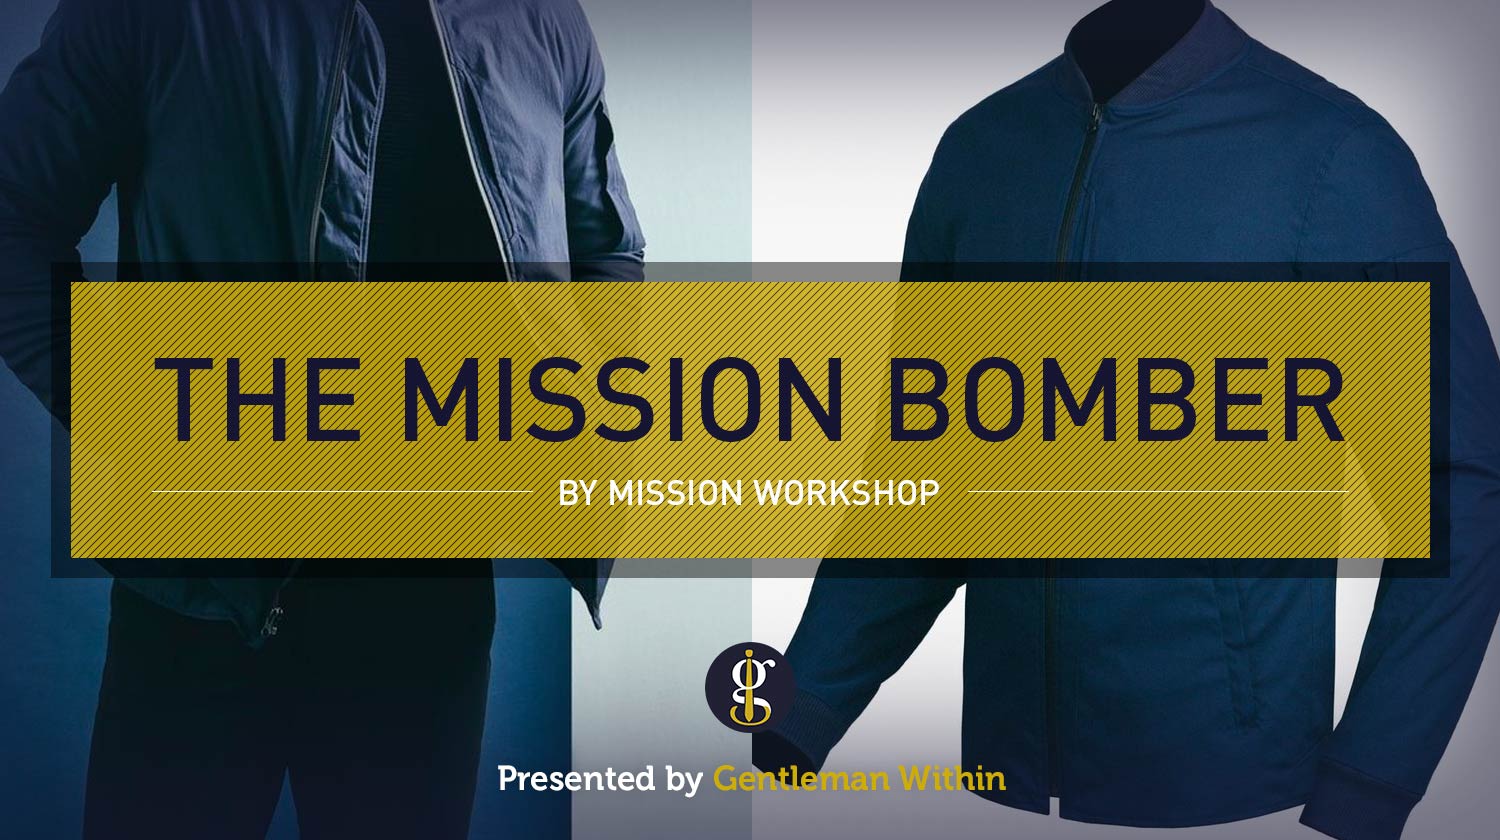 Style Spotlight | The Mission Workshop Bomber Jacket | GENTLEMAN WITHIN